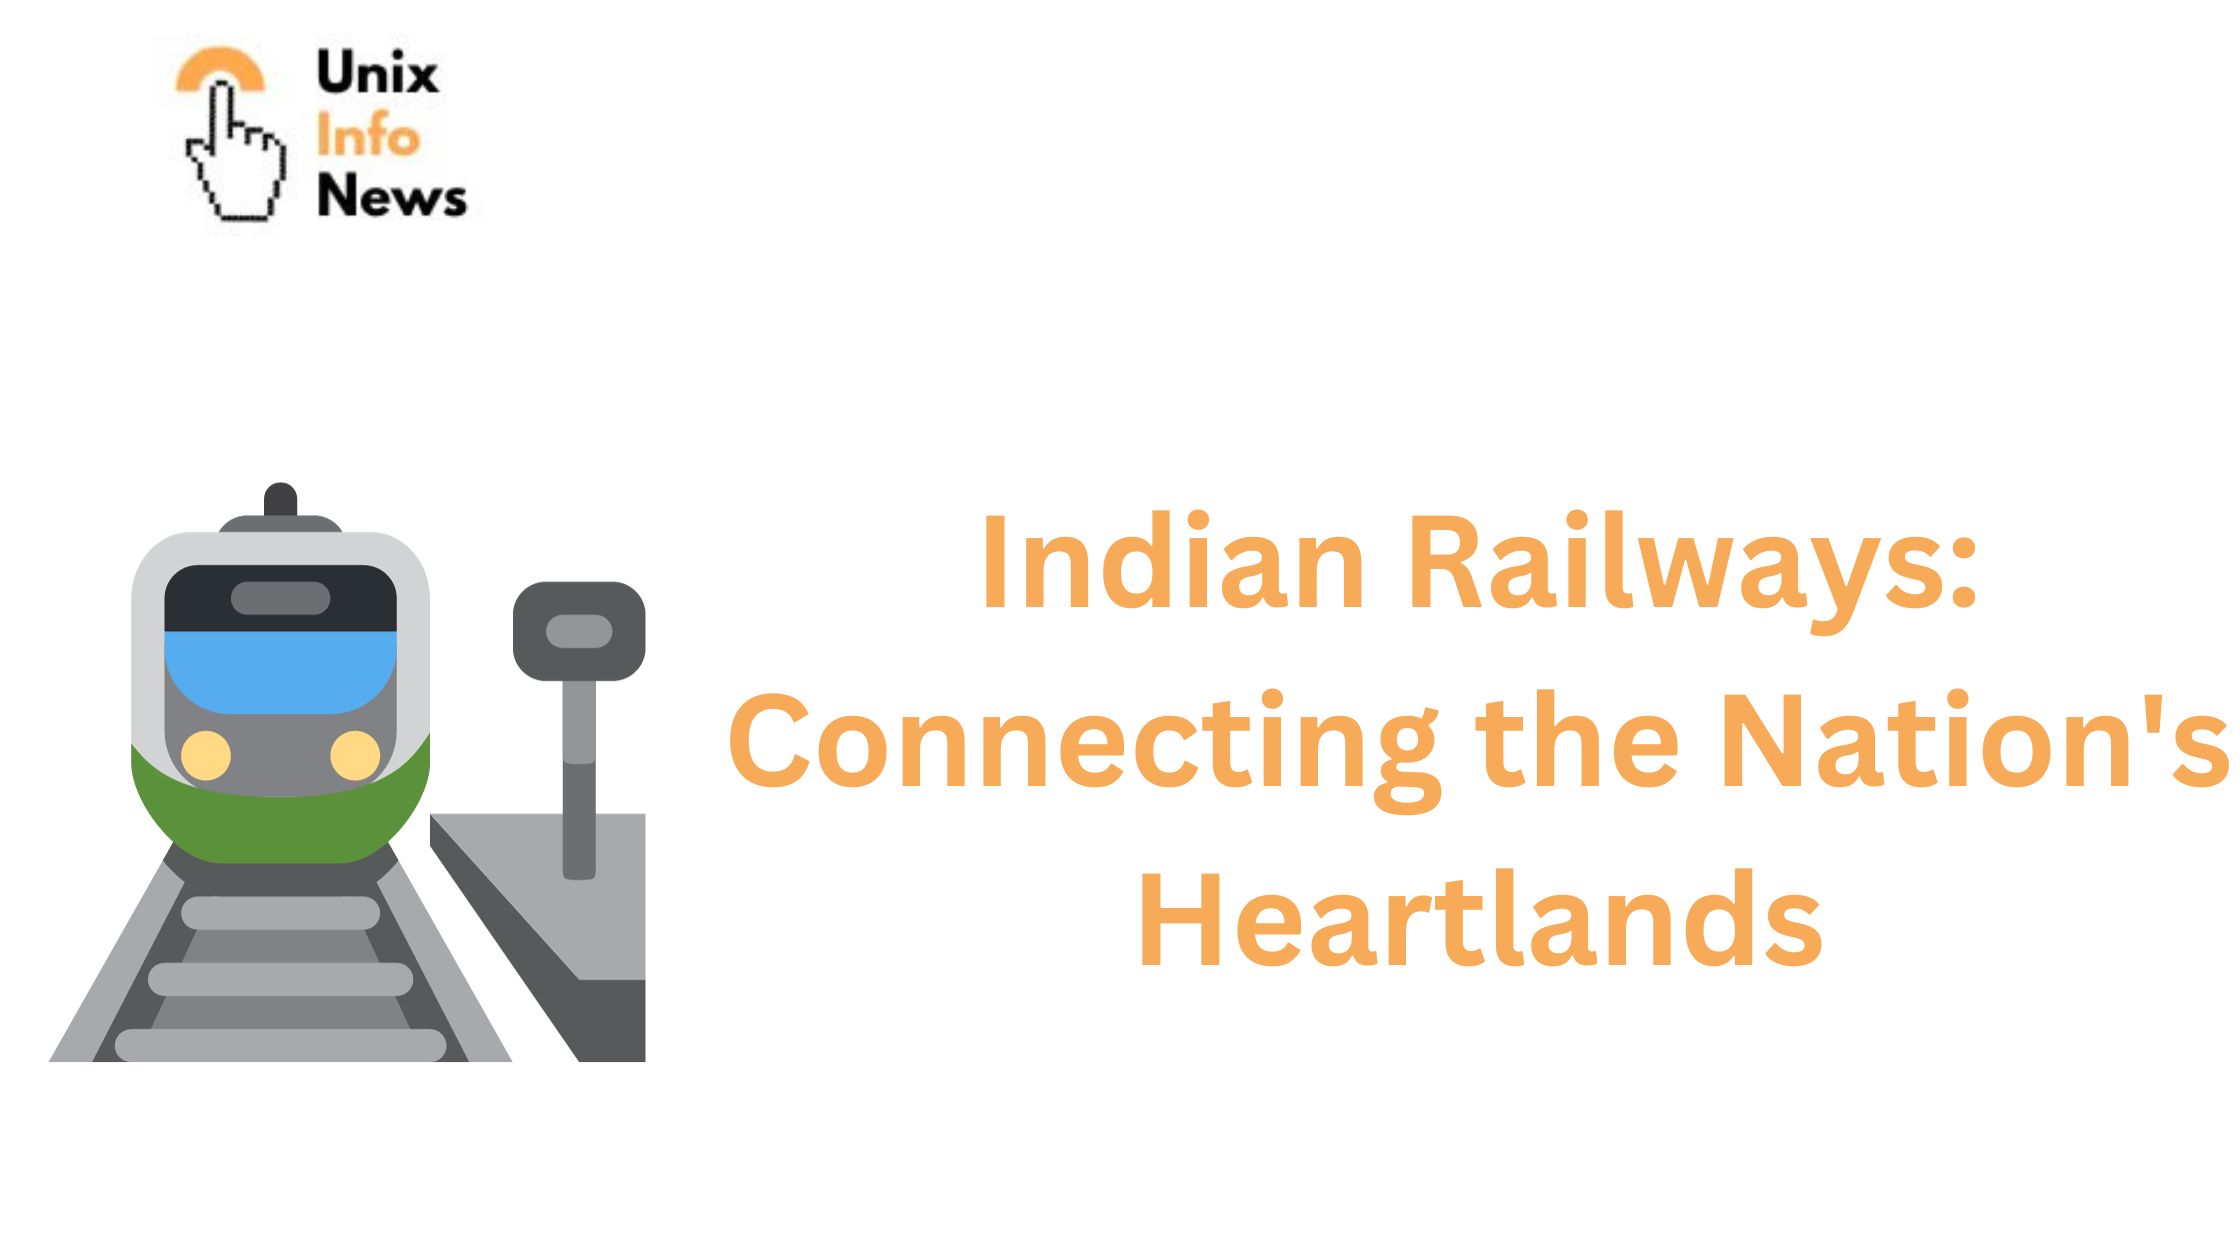 Connecting the Nation's Heartlands